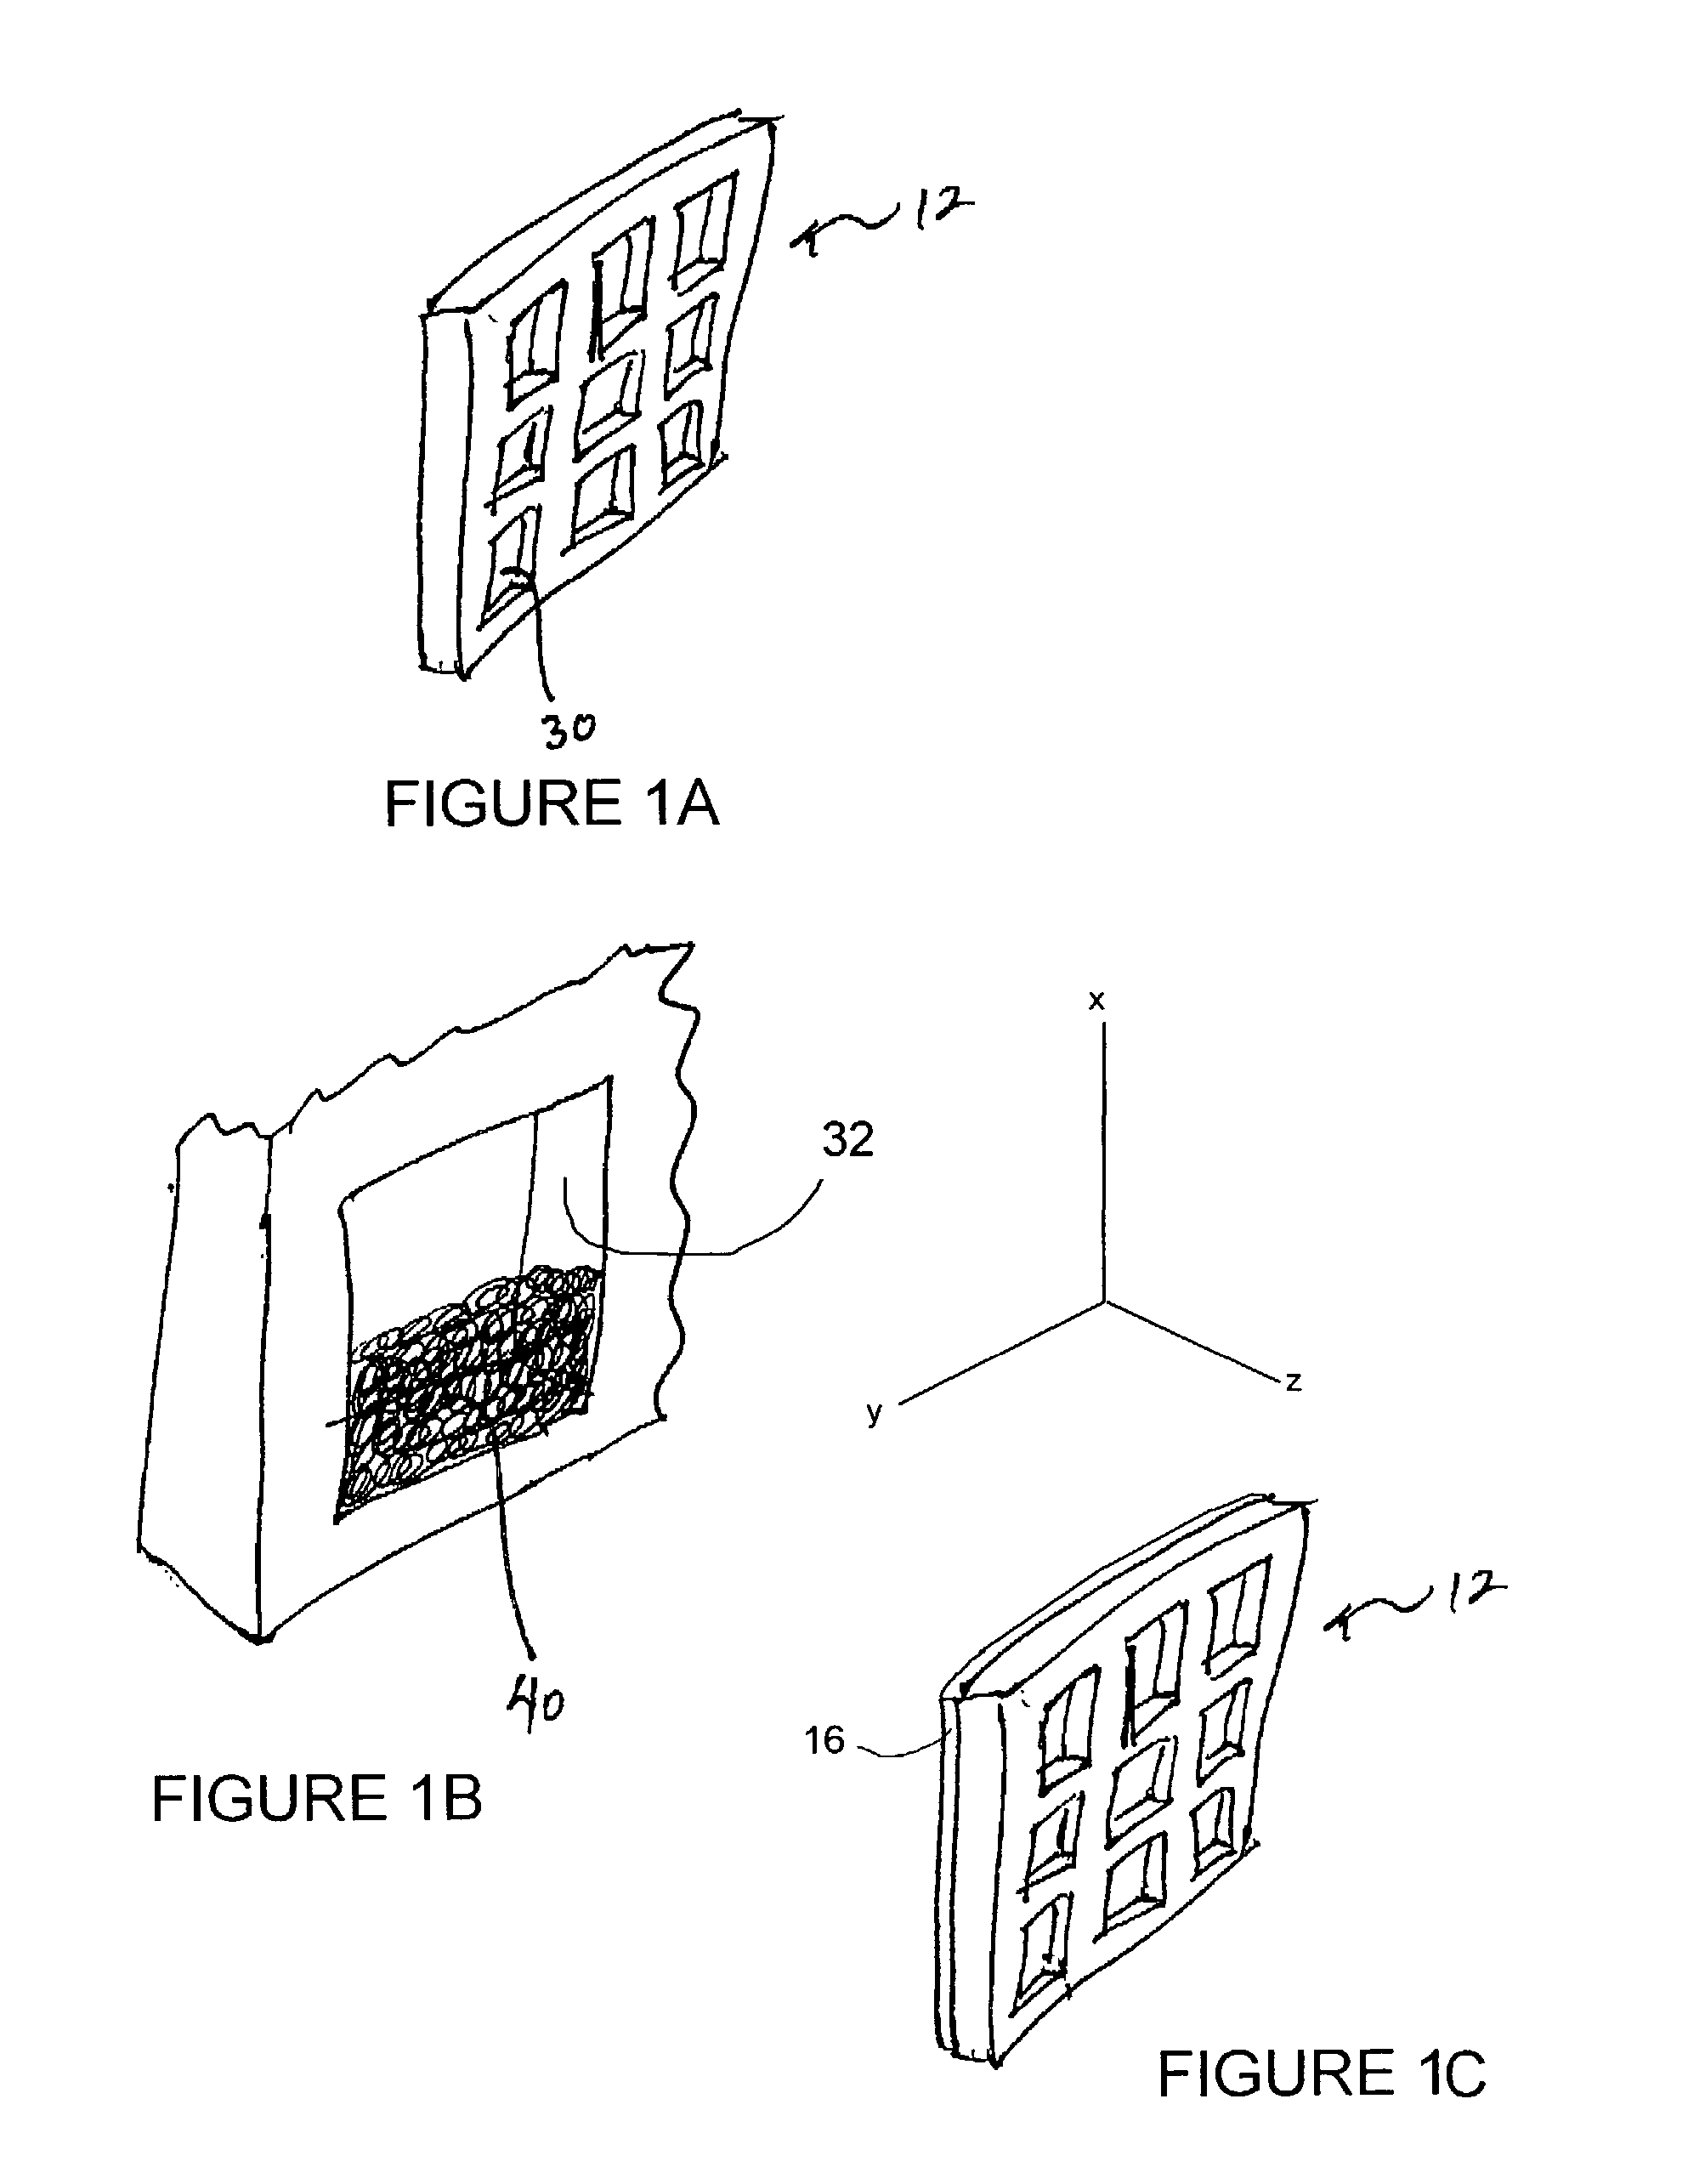 Anode structure for metal air electrochemical cells